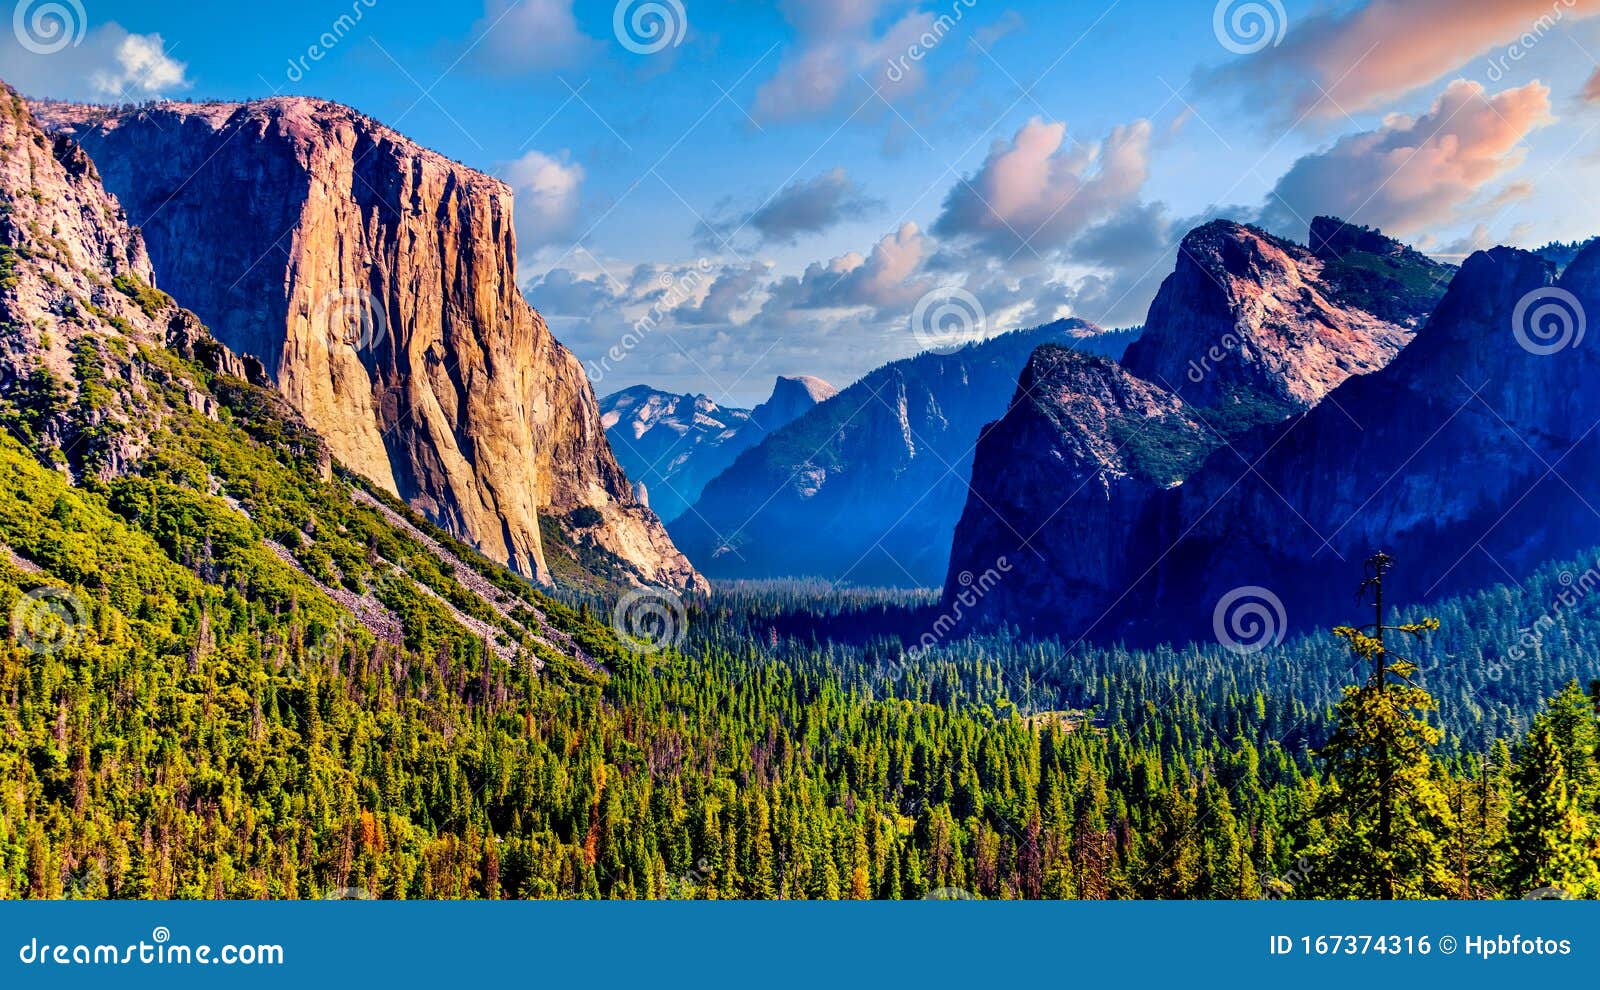 tunnel view of yosemite valley with famous granite rock el capitan on the left and dry bridalveil fall in yosemite national park